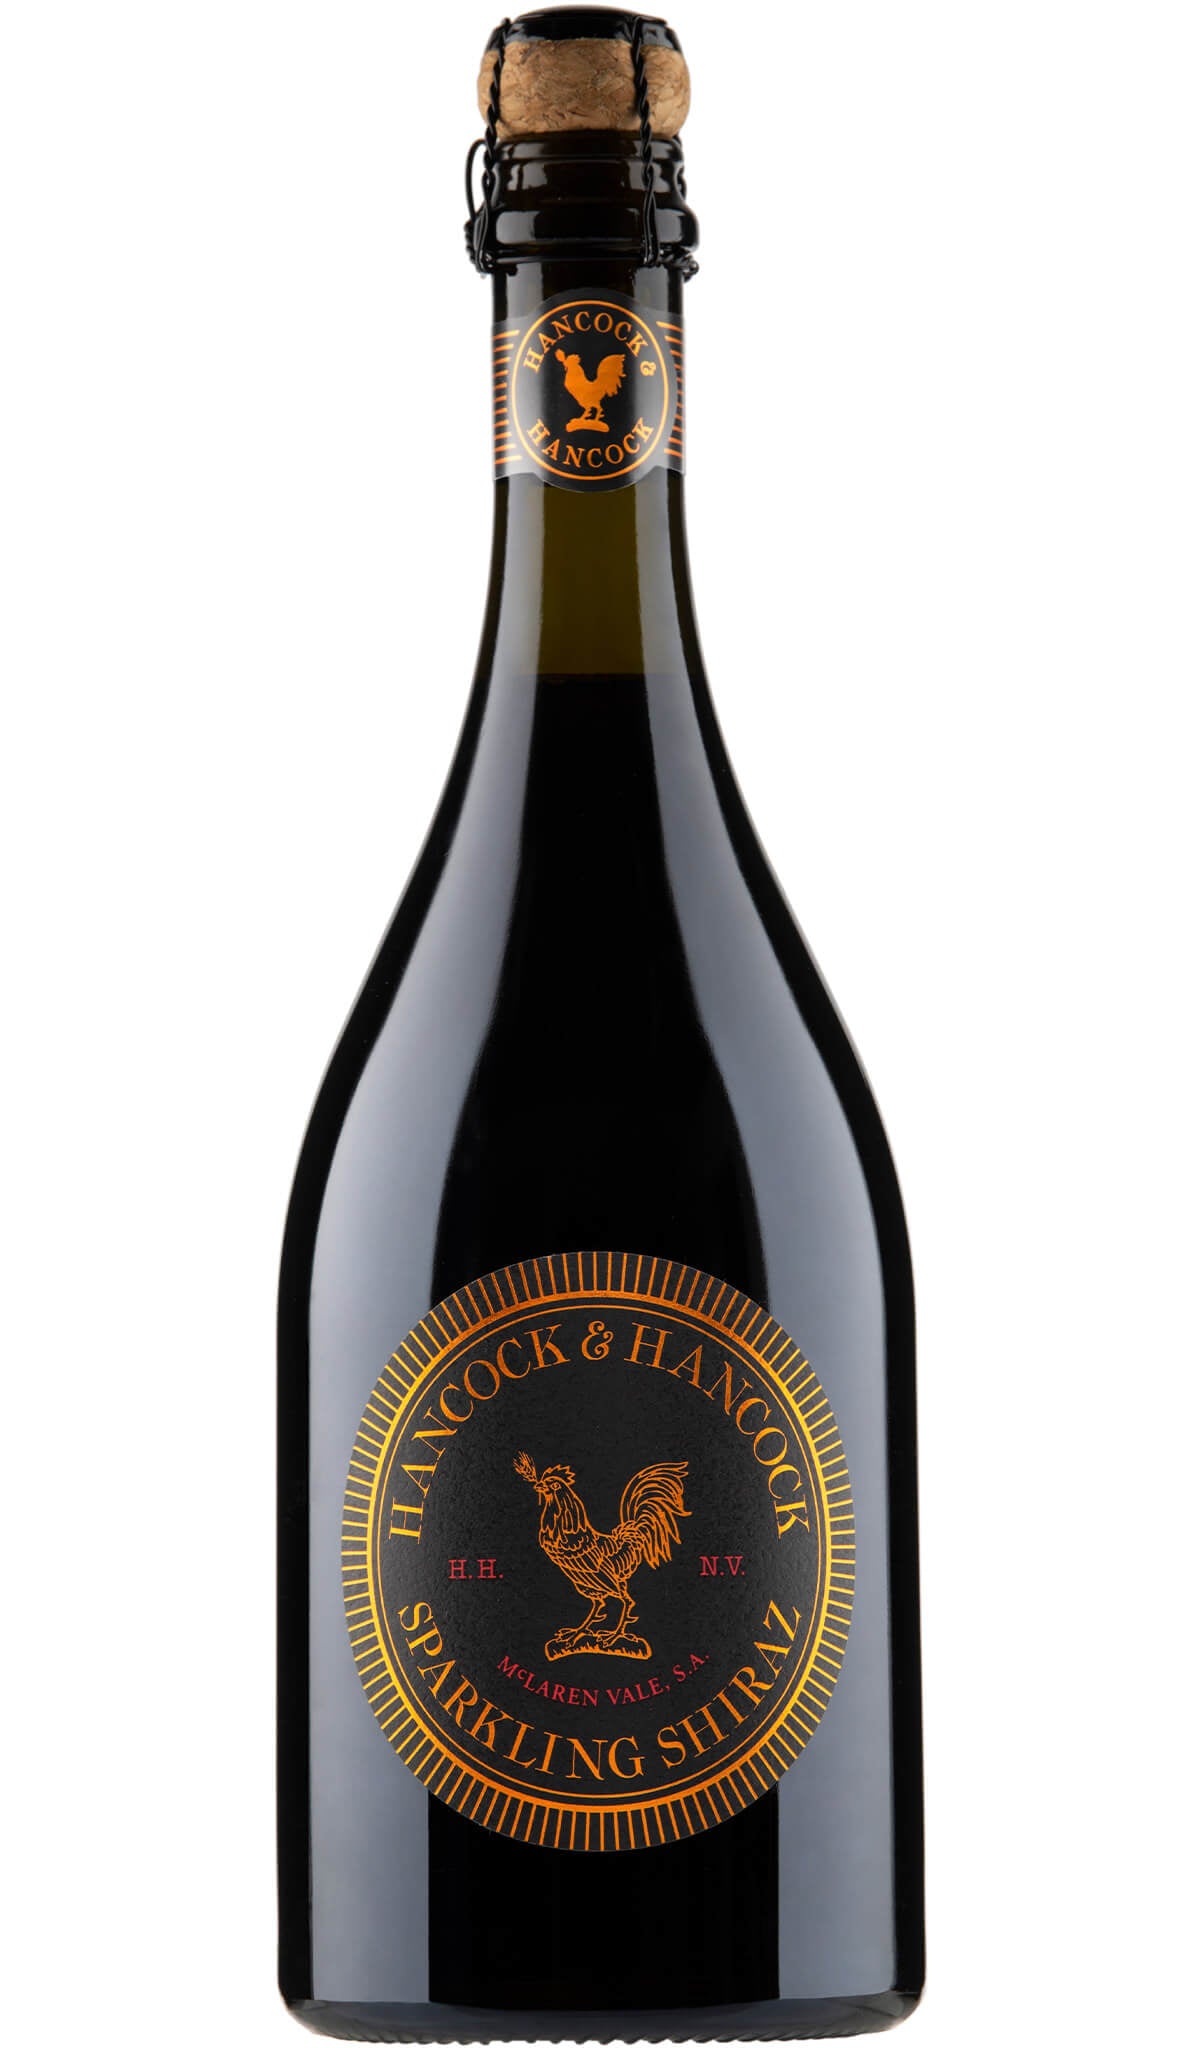 Find out more, explore the range and purchase Hancock & Hancock Shiraz Cuvée NV 750mL available online at Wine Sellers Direct - Australia's independent liquor specialists.